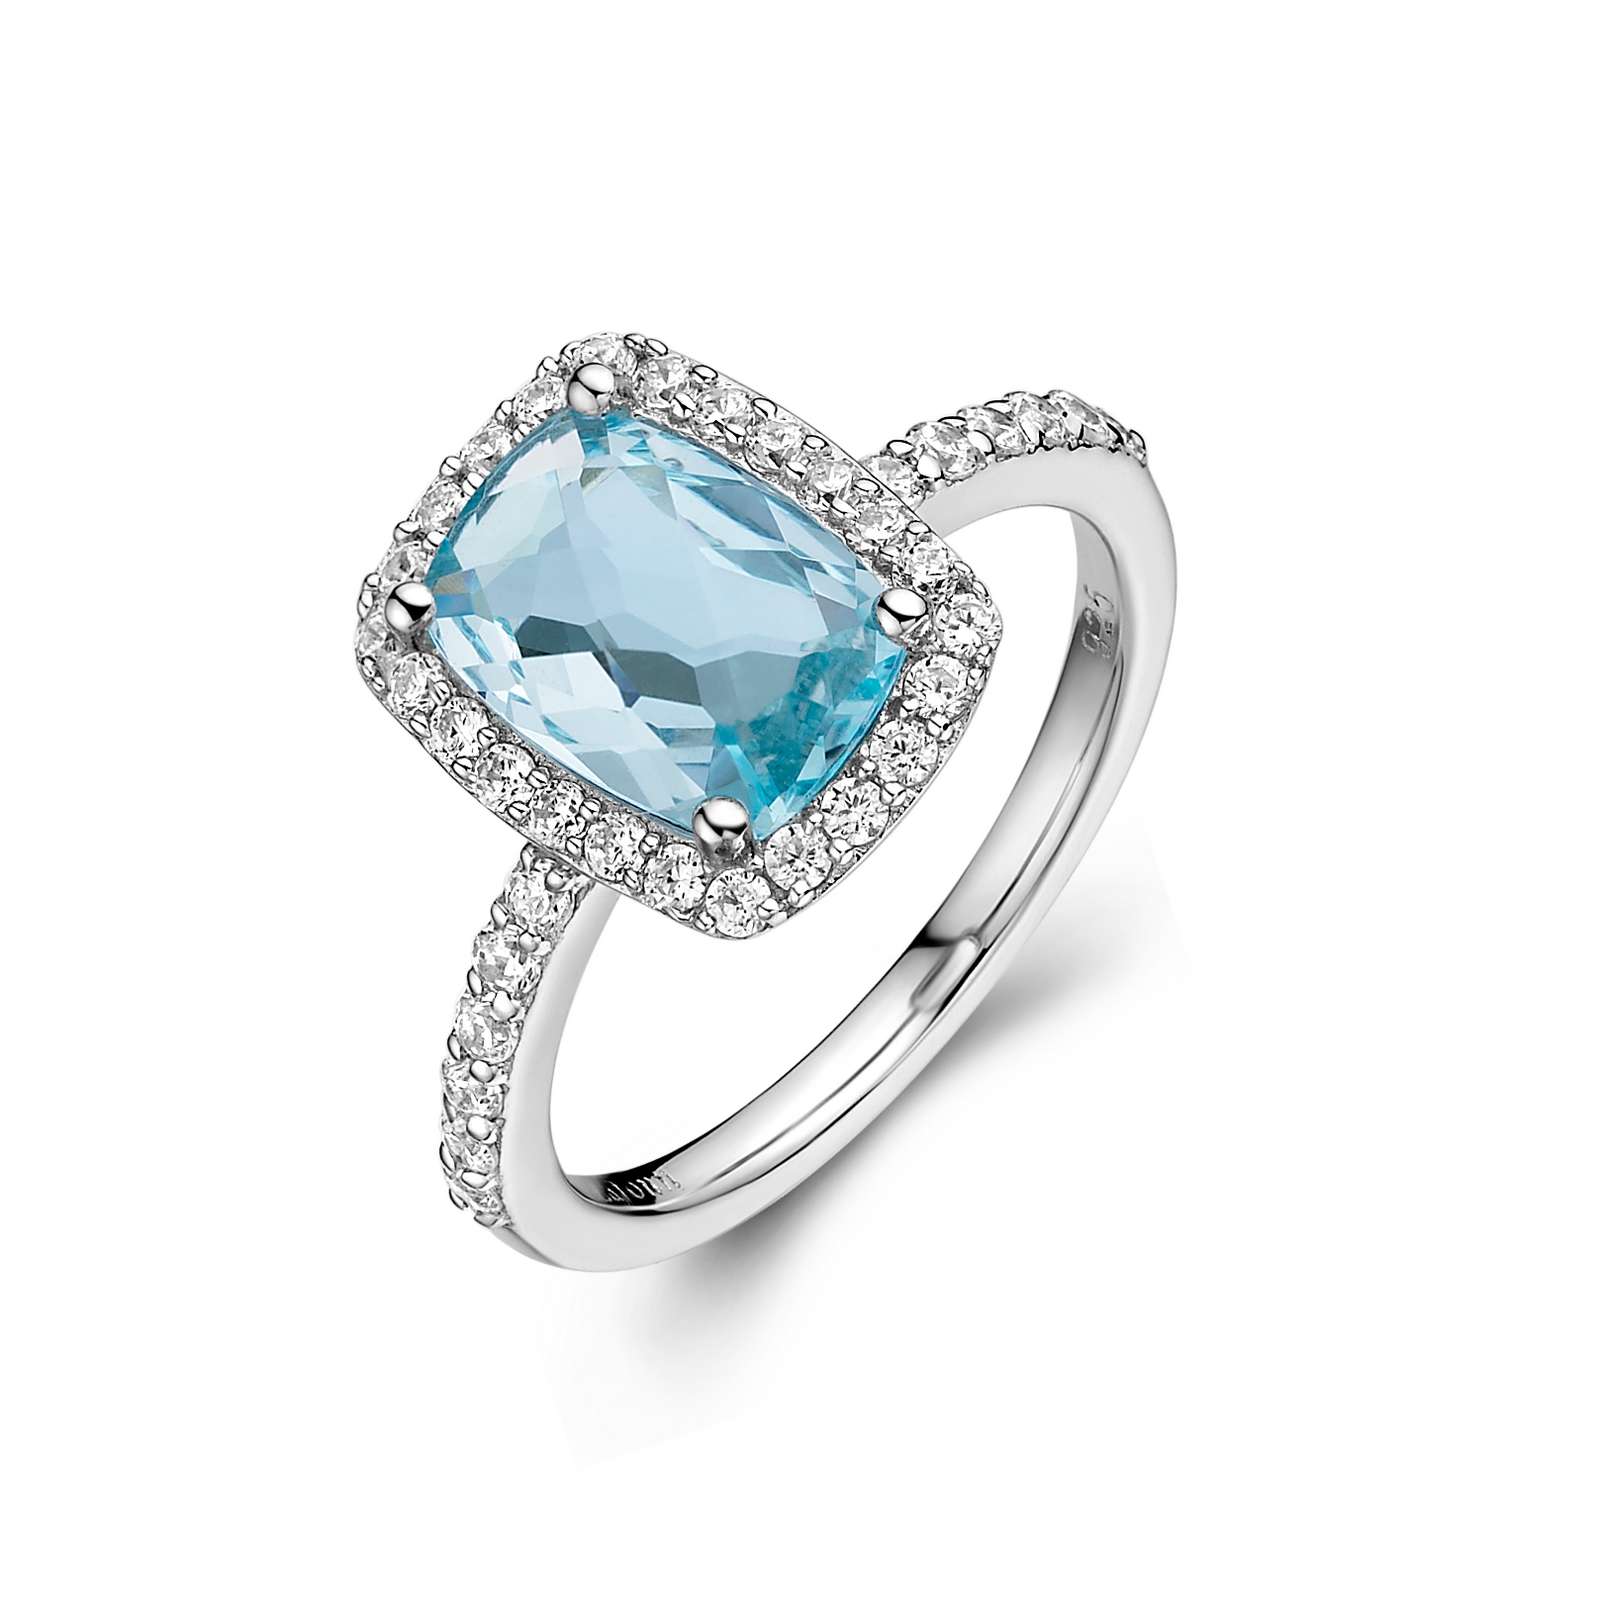 Genuine Blue Topaz Halo Ring Griner Jewelry Co. Moultrie, GA